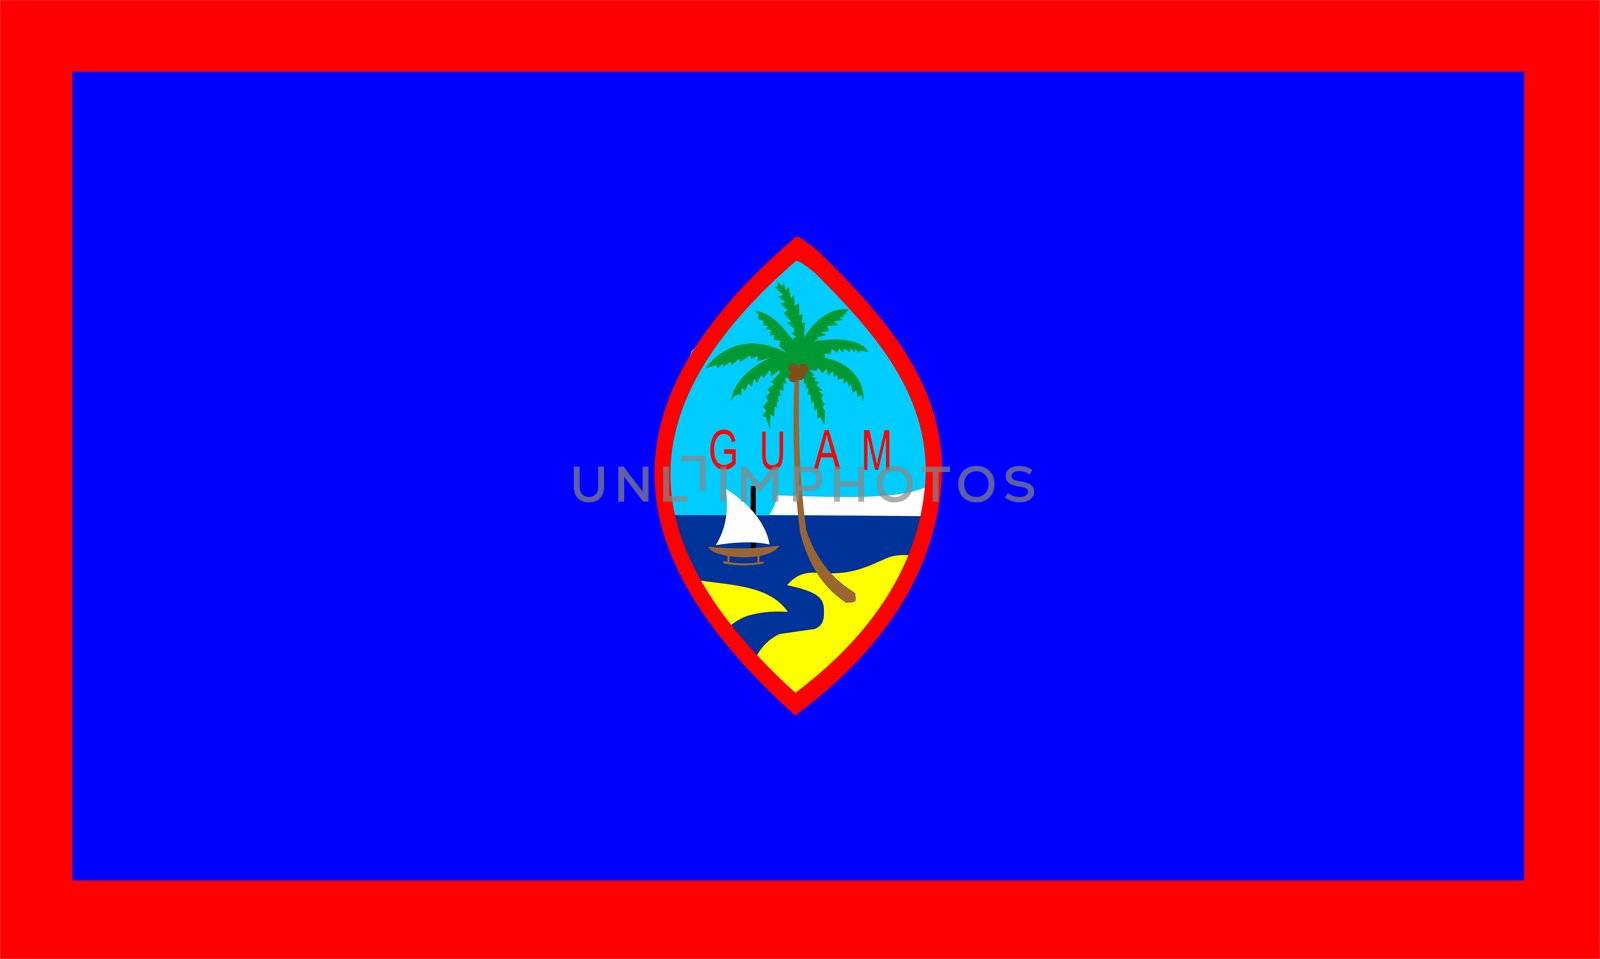 2D illustration of the flag of Guam